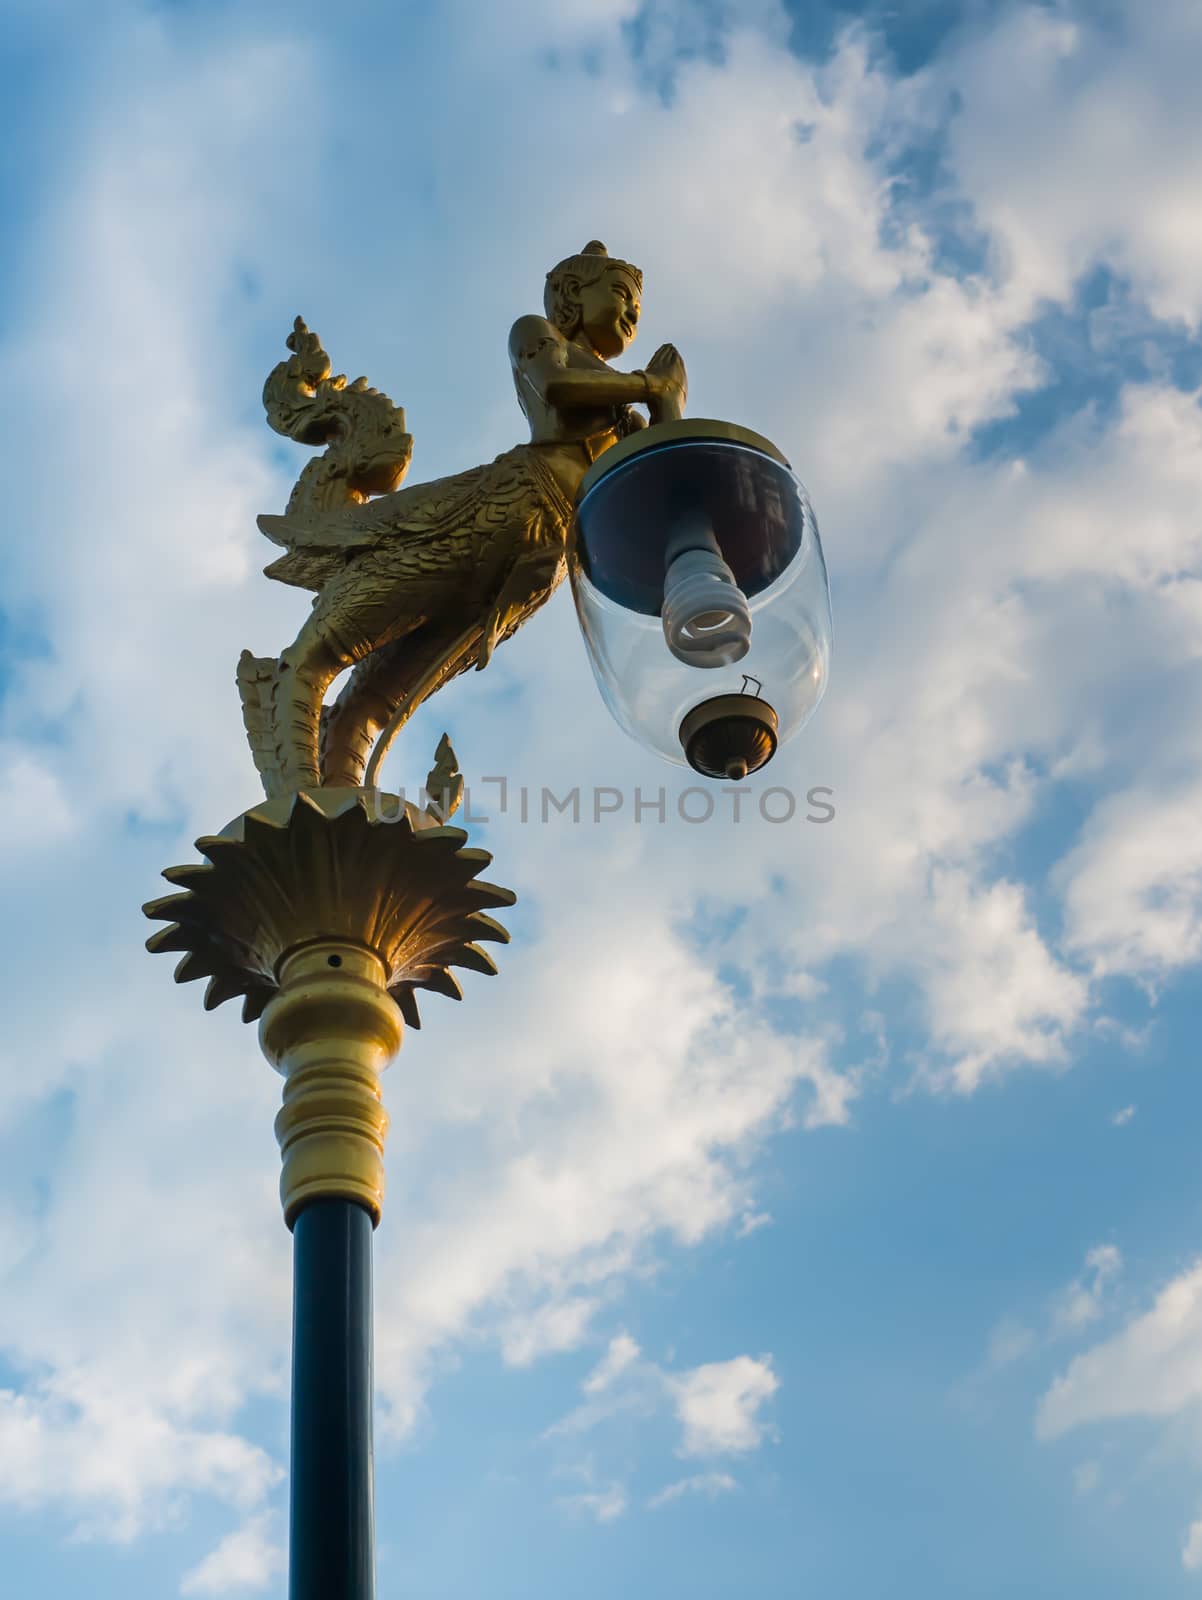 In Thailand has many beautiful light poles everywhere.